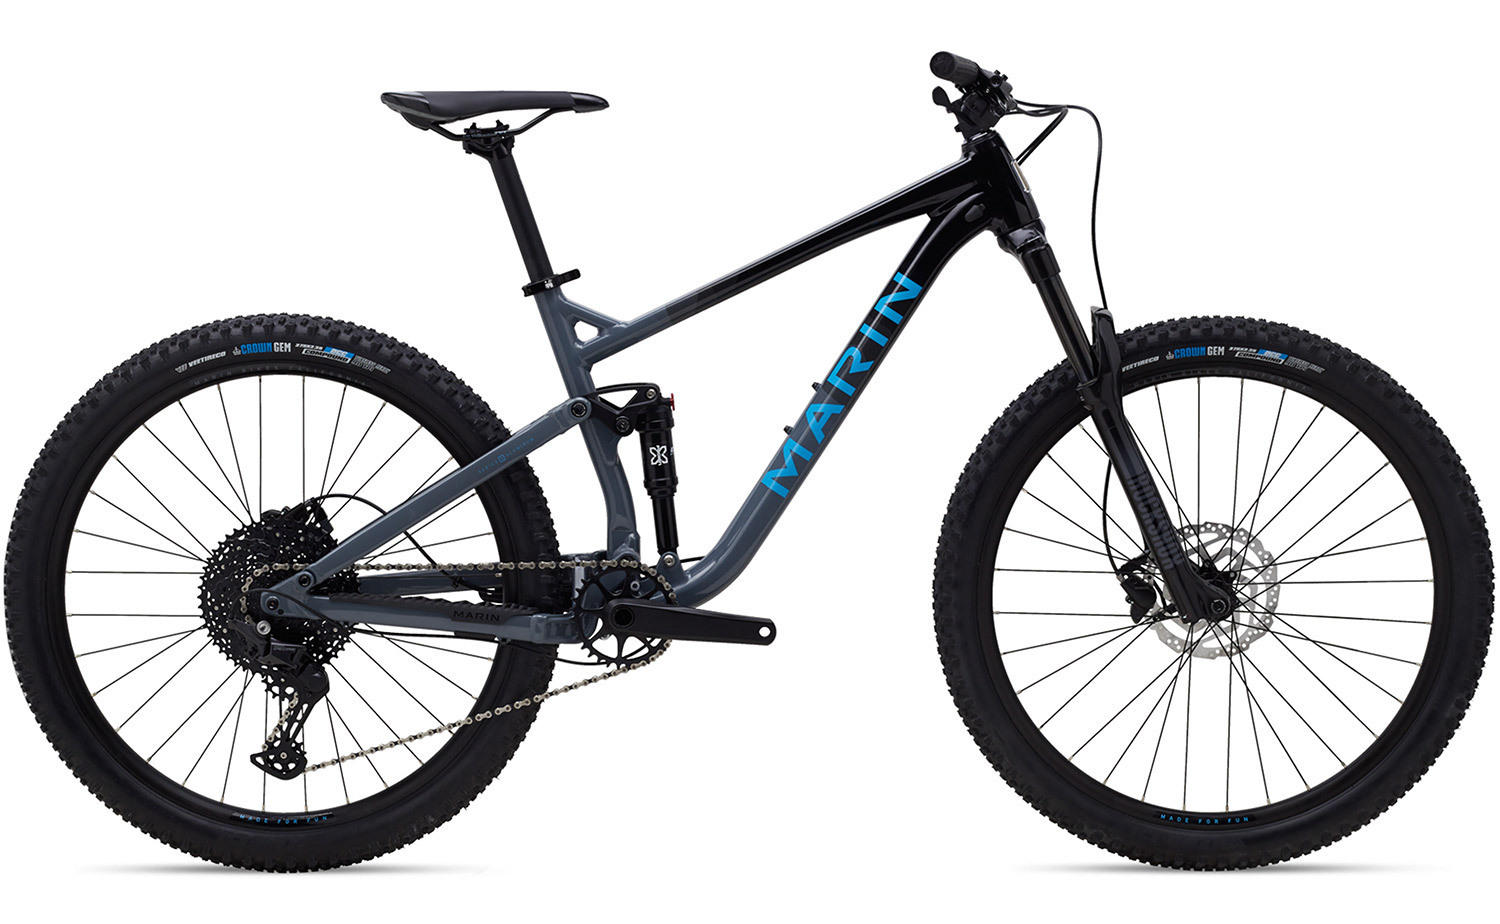 Black Giant Stance 29” 2 full-suspension mountain bike under $2000 with disc brakes